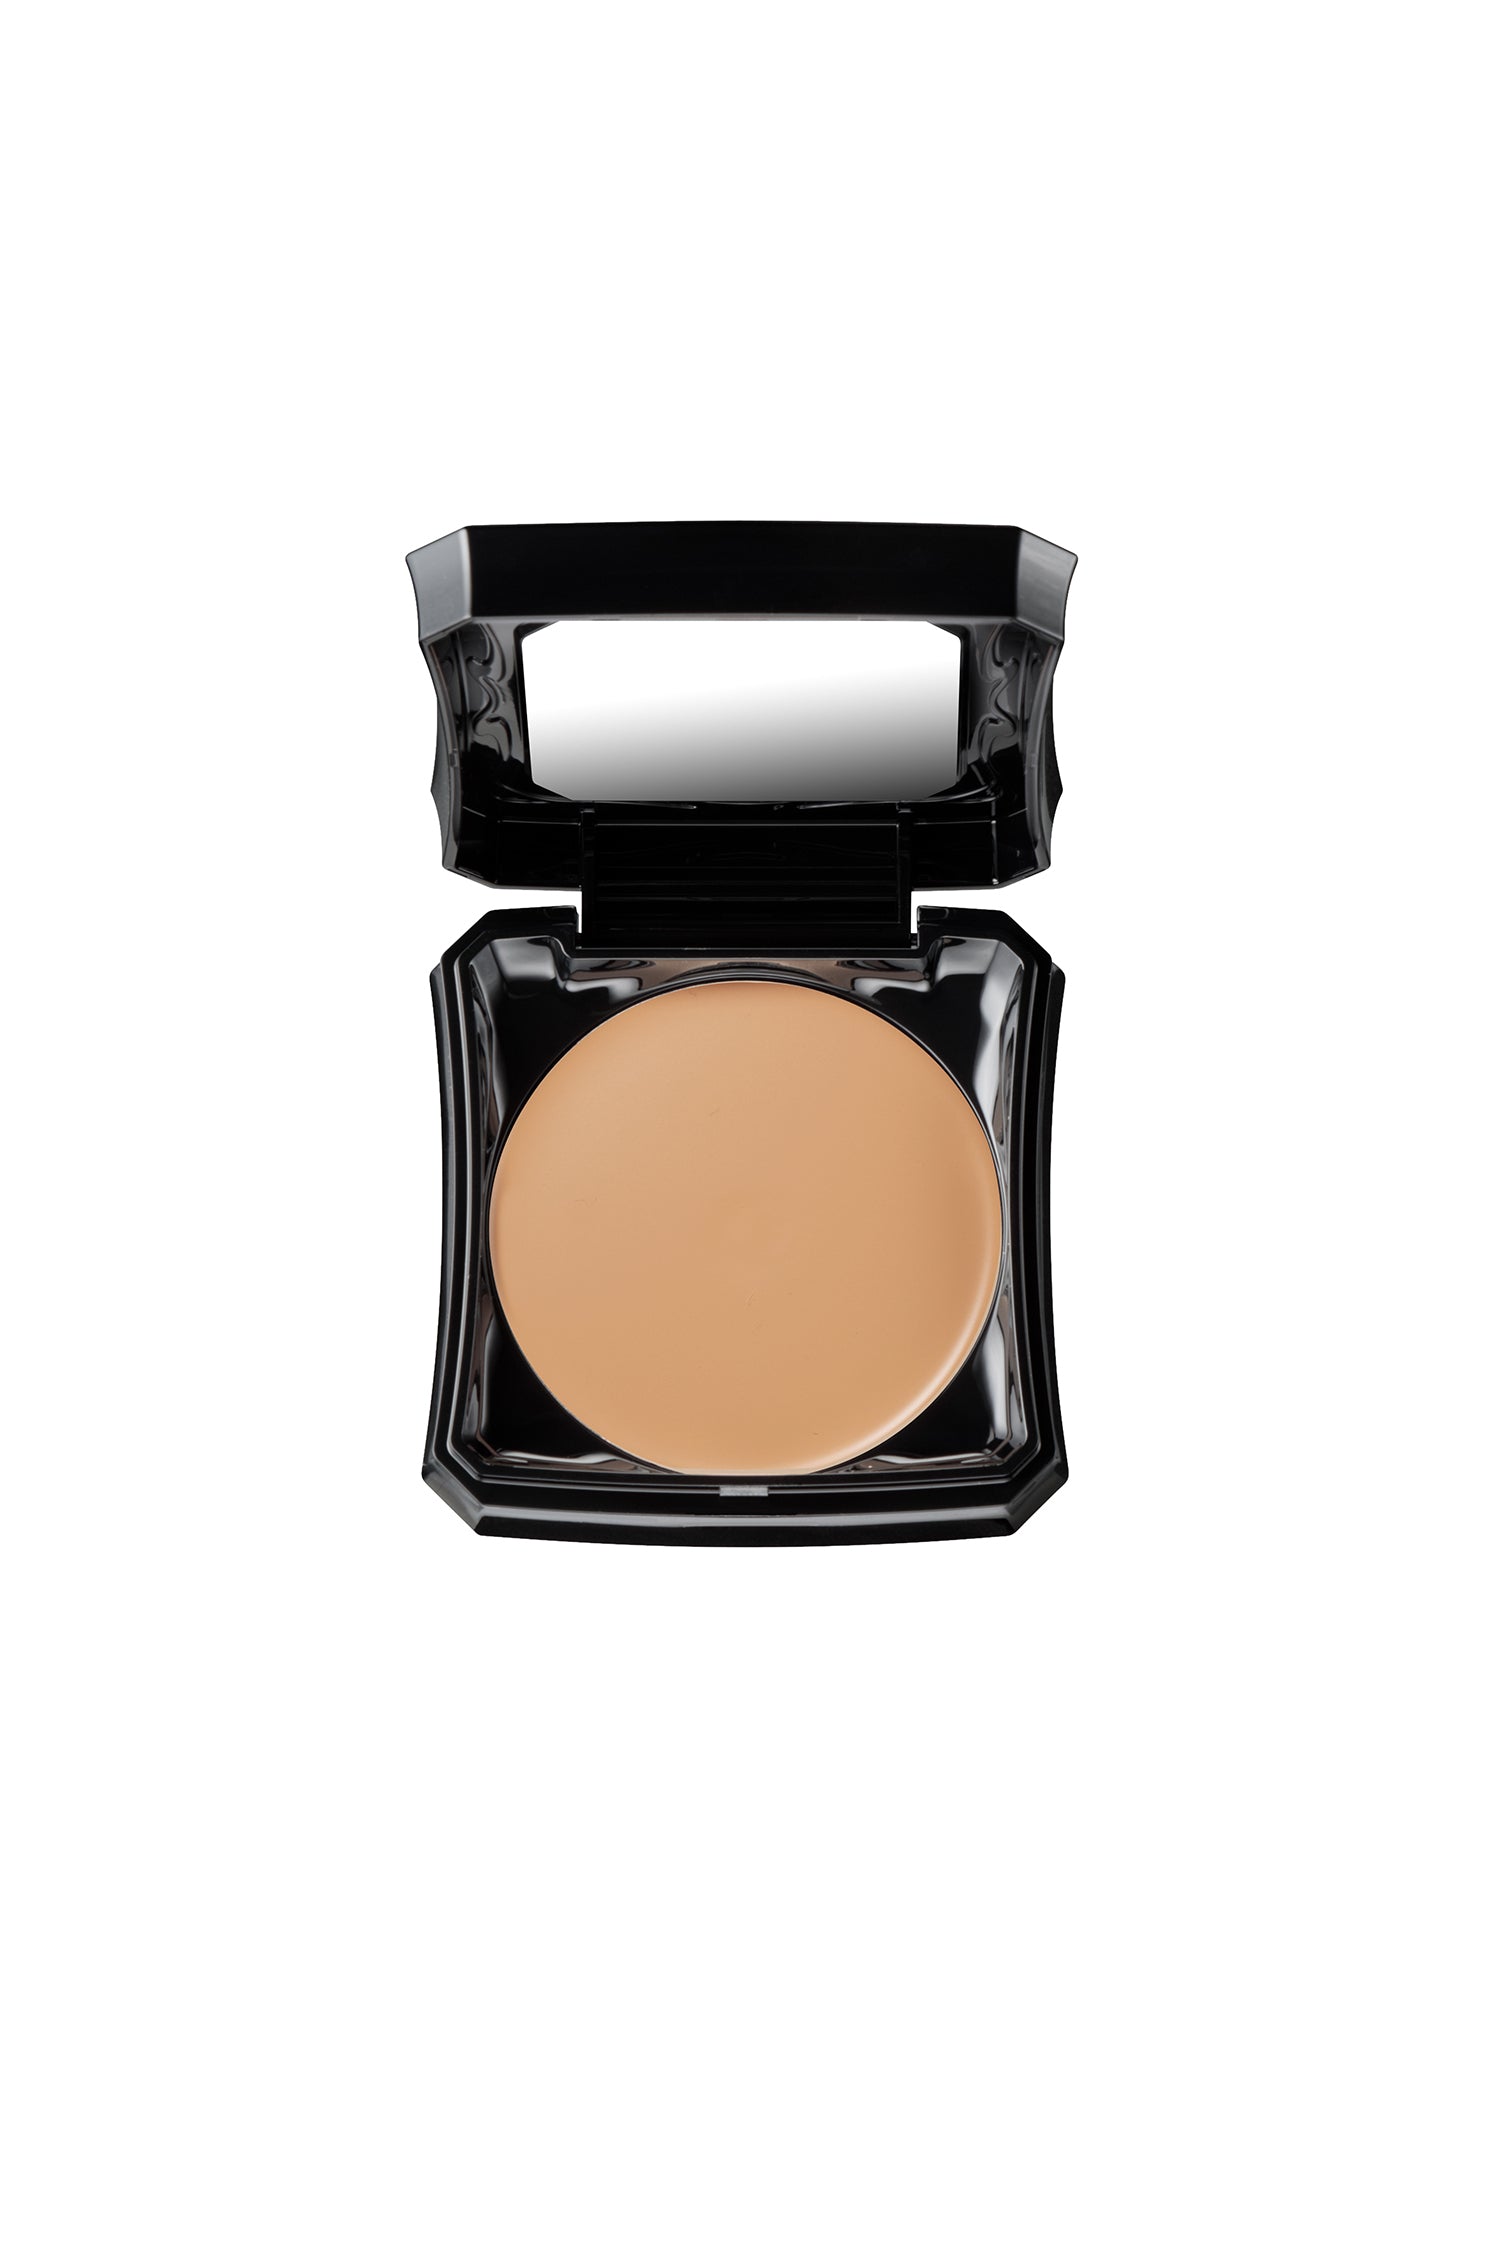 Anna Sui MEDIUM foundation is in a black squared container with powders and mirror